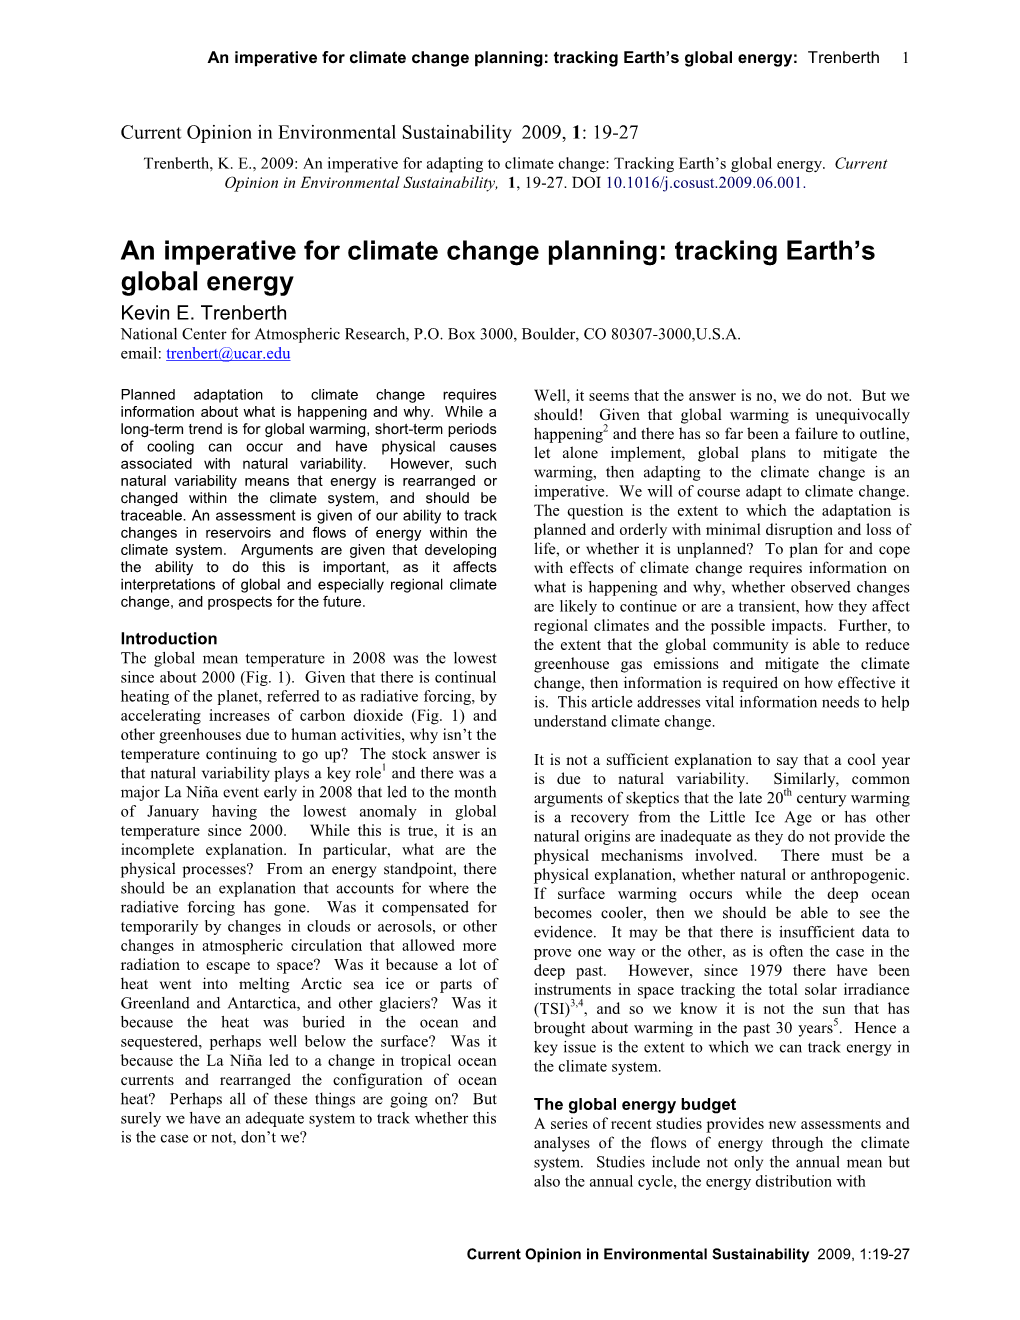 An Imperative for Climate Change Planning: Tracking Earth’S Global Energy: Trenberth 1